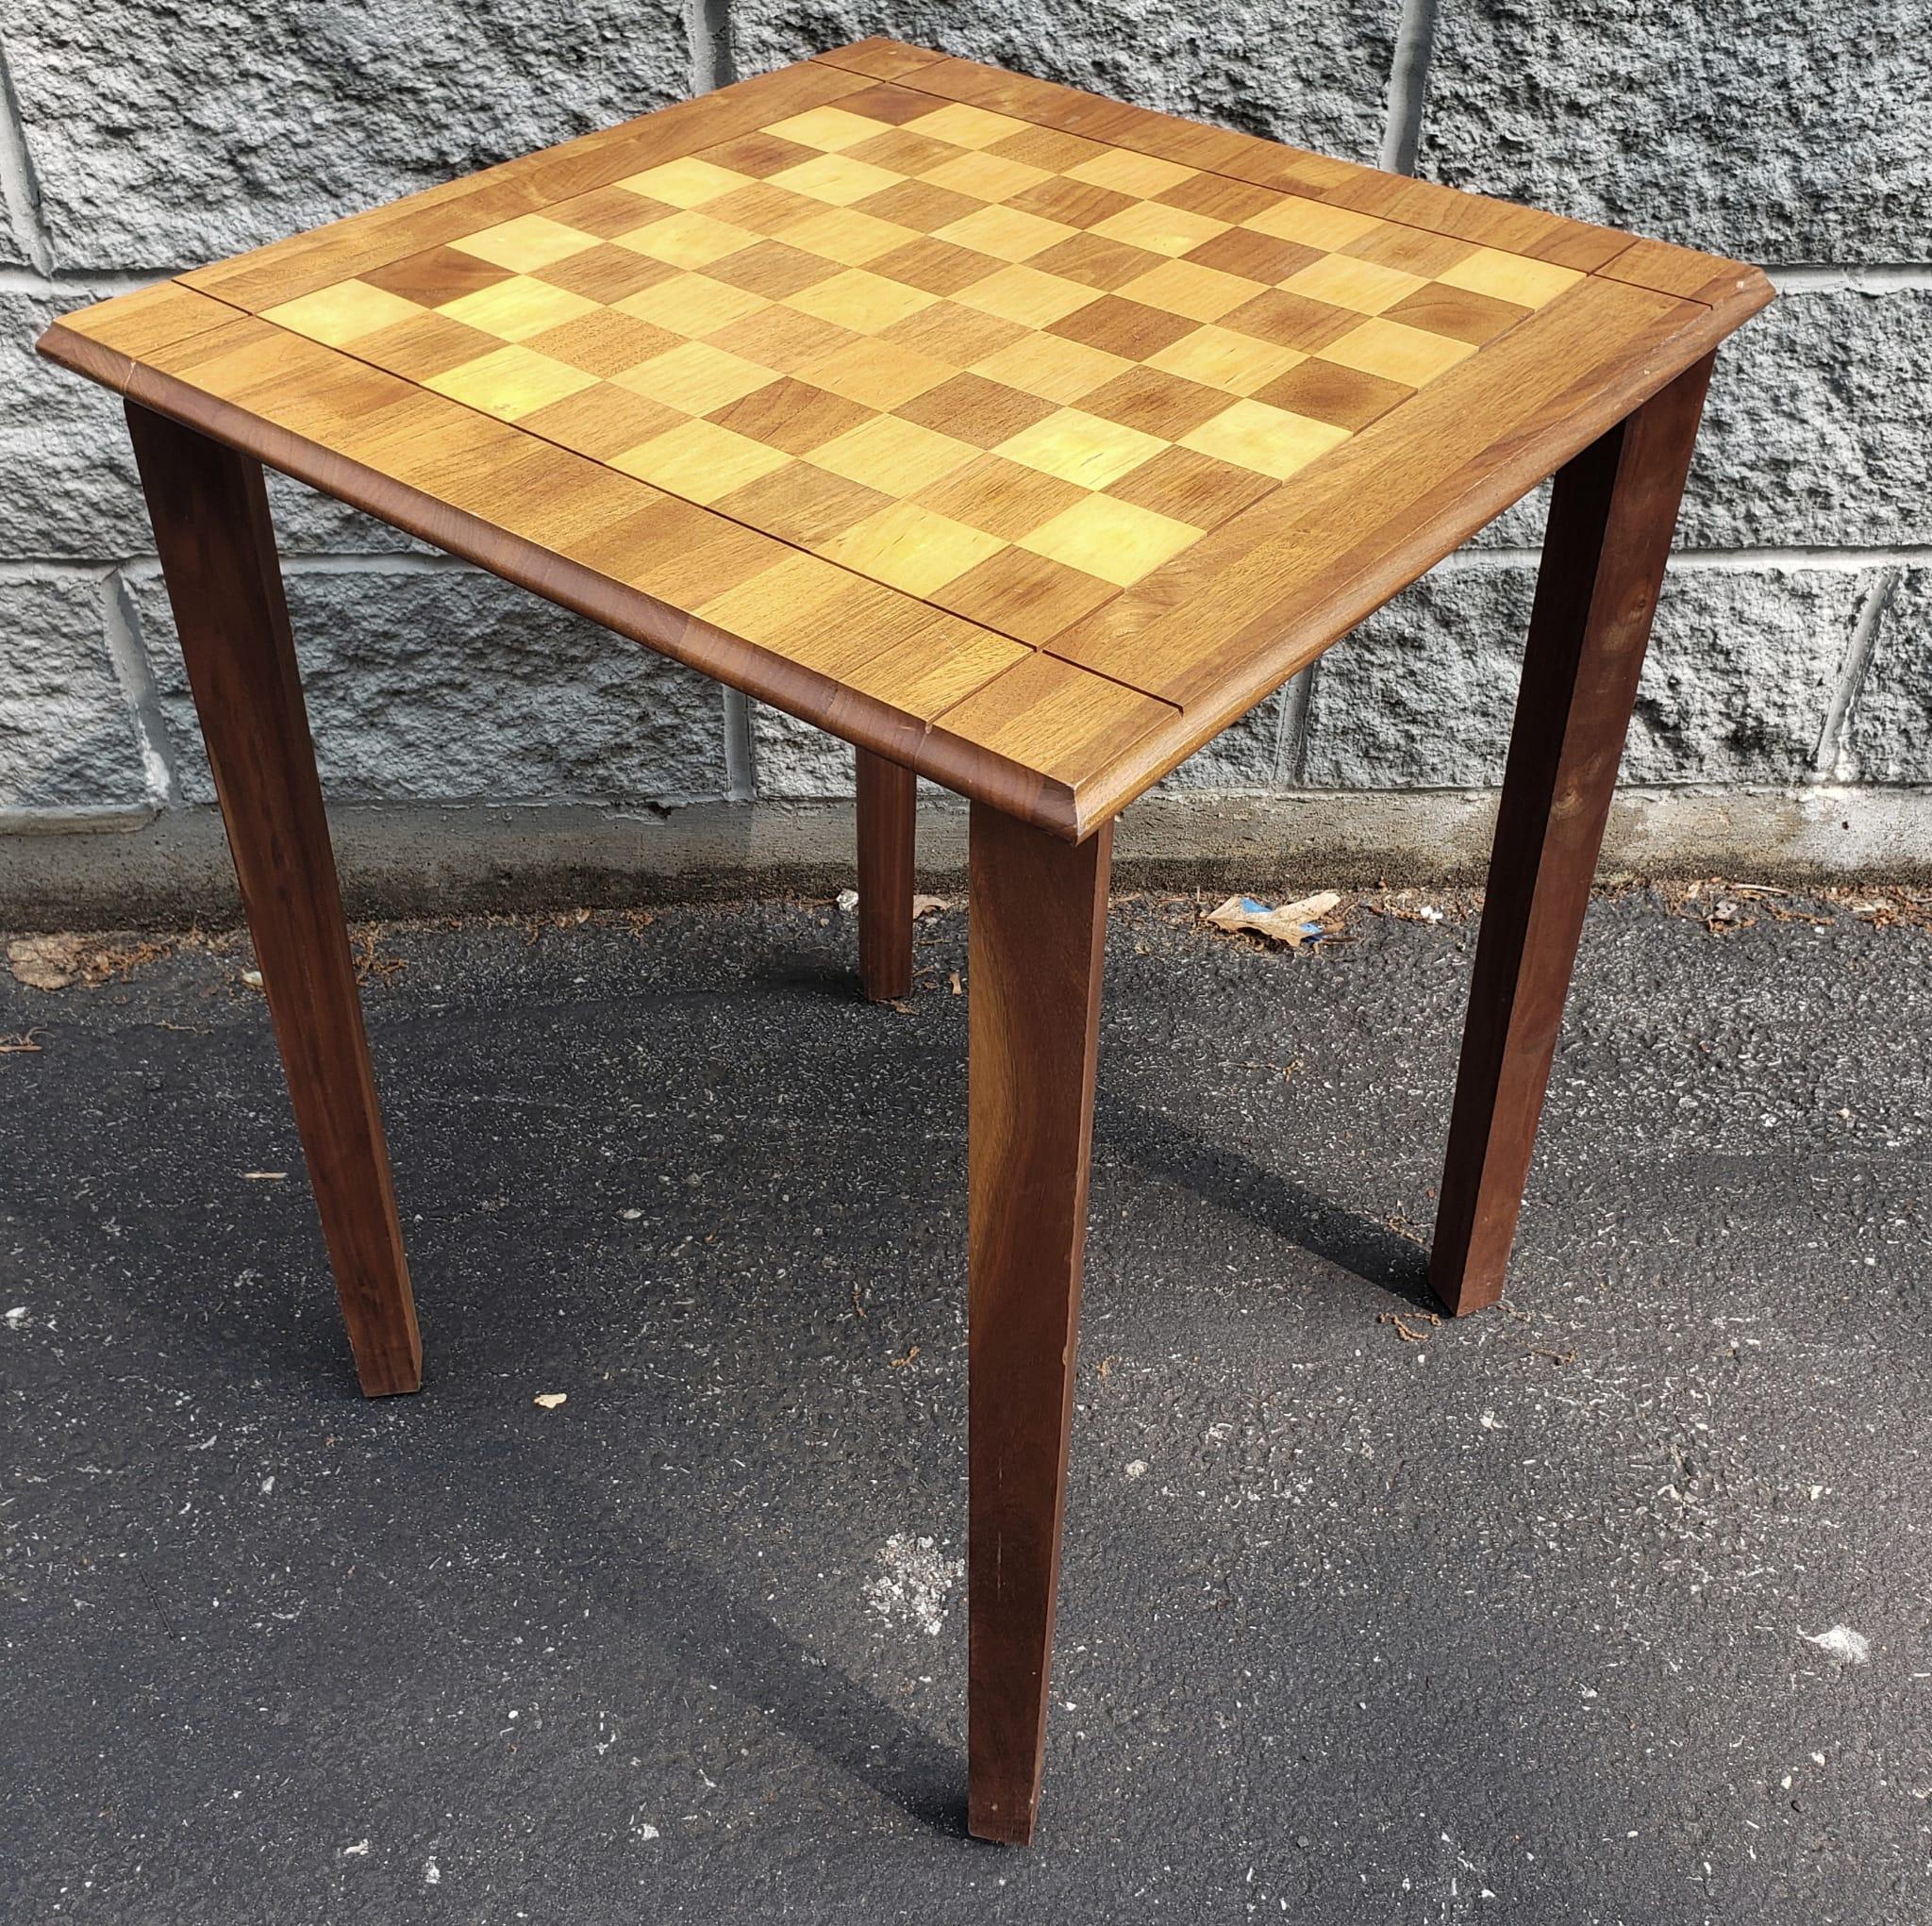 A Drueke Solid Walnut and Birch Parquetry Double Sided Games Table in great vinatge condition. 
Measures 21